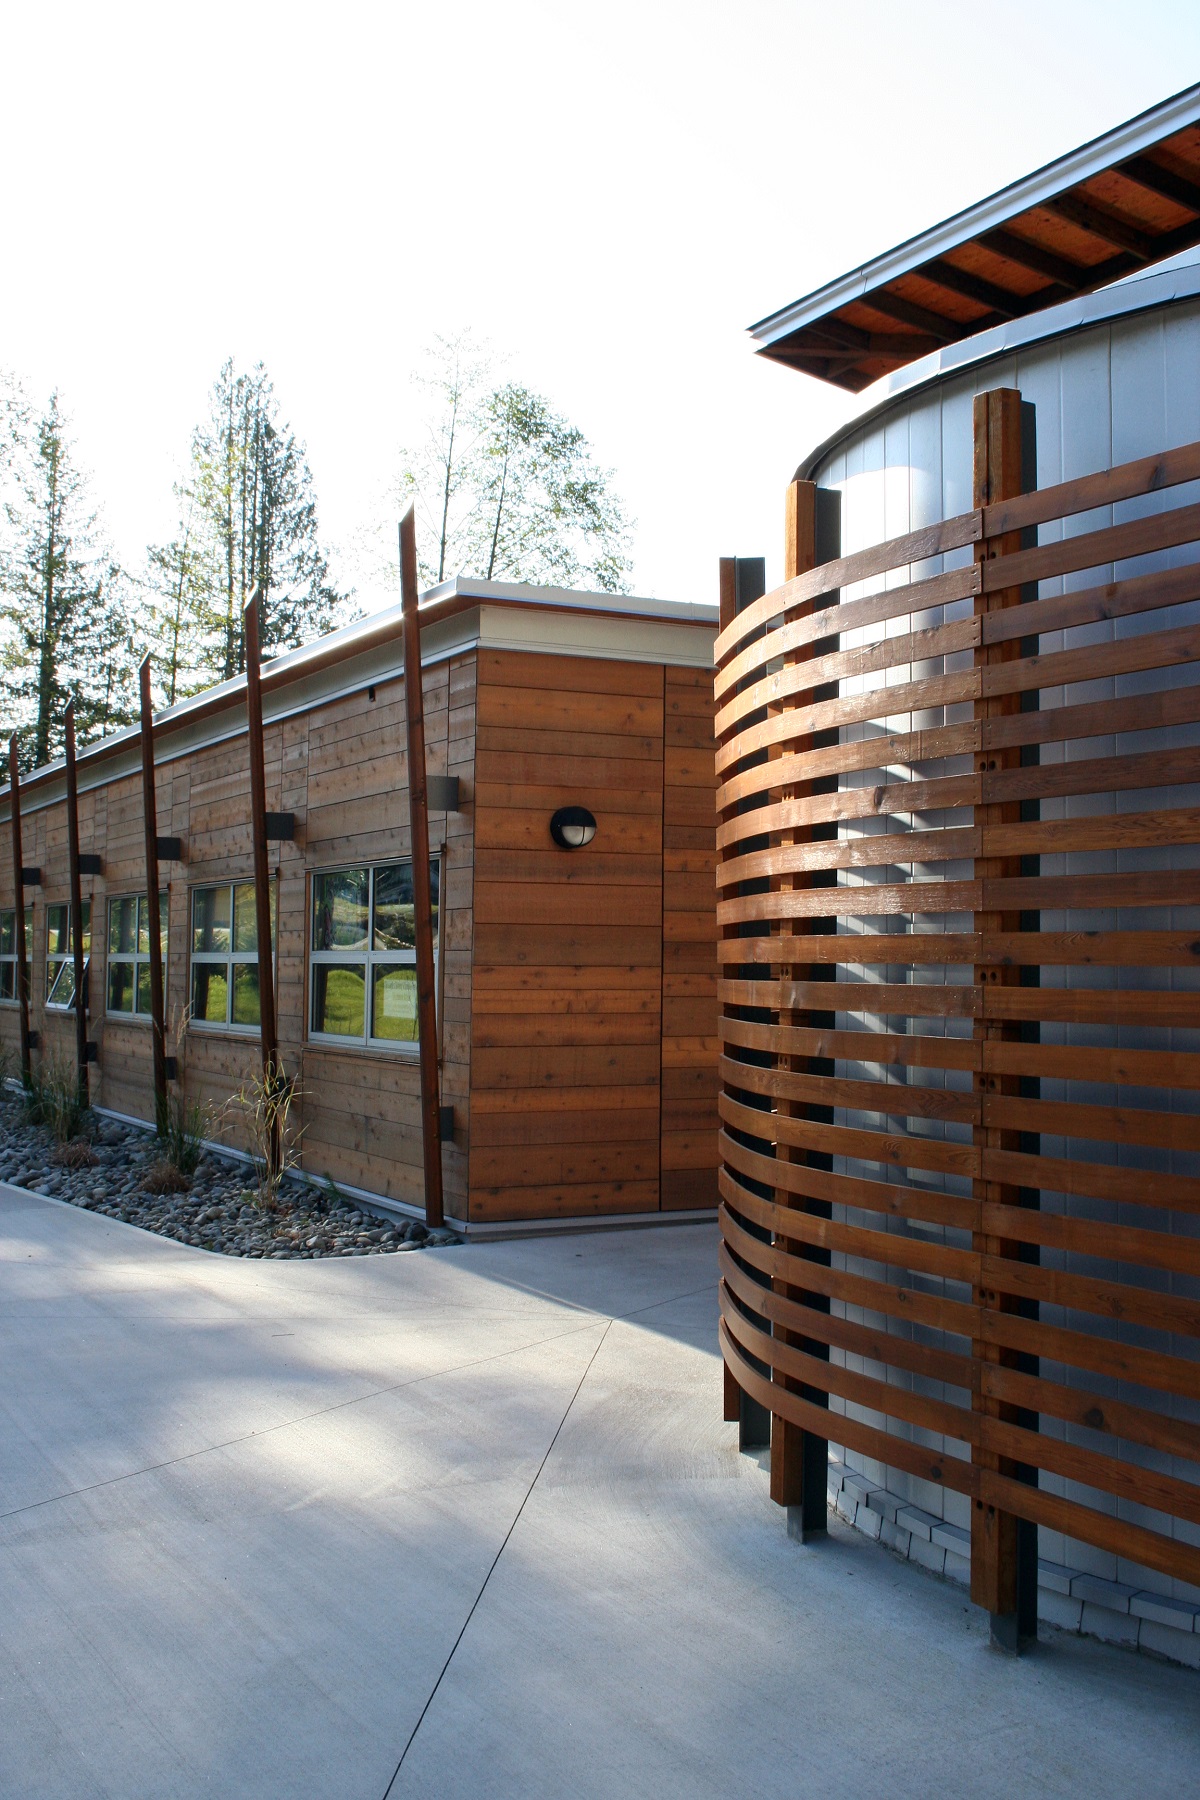 Exterior afternoon view of low rise Tla'Amin Community Health Services building showing extensive use of wood siding and decorative wood trim